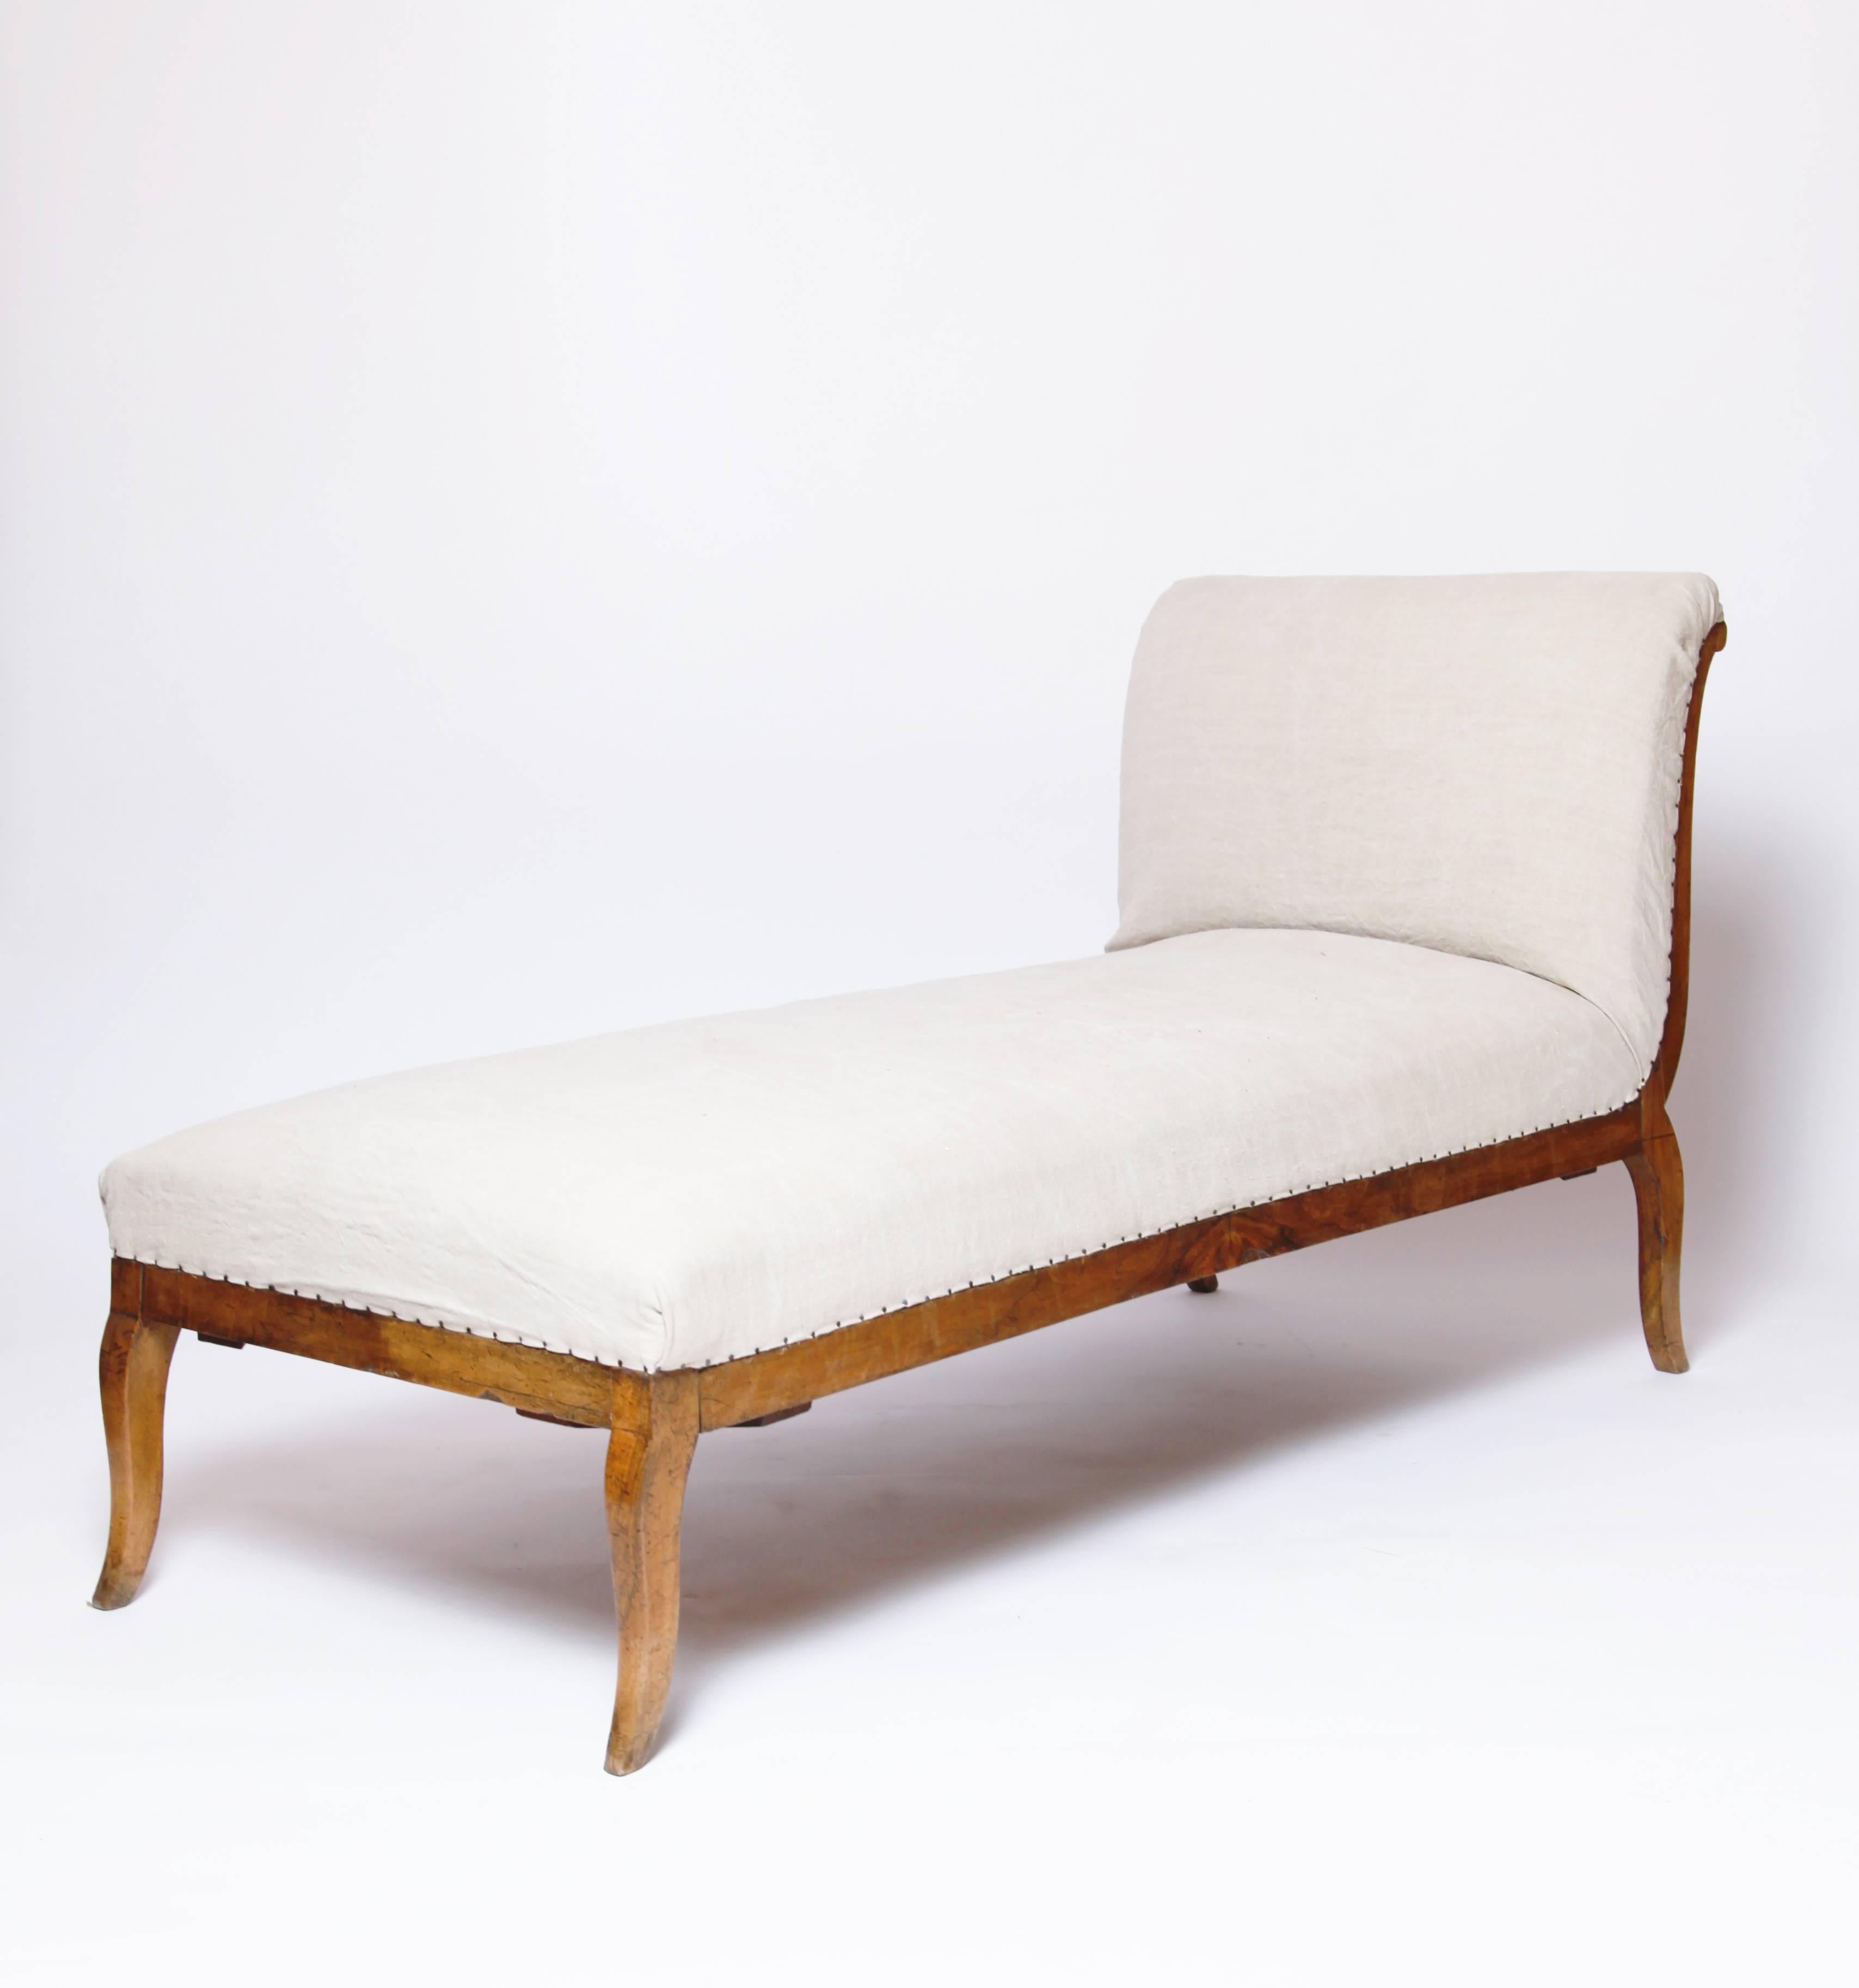 A simple and graceful lit de repos. The walnut frame has a beautiful surface quality, and the horsehair mattress has been covered in a rustic cotton canvas.